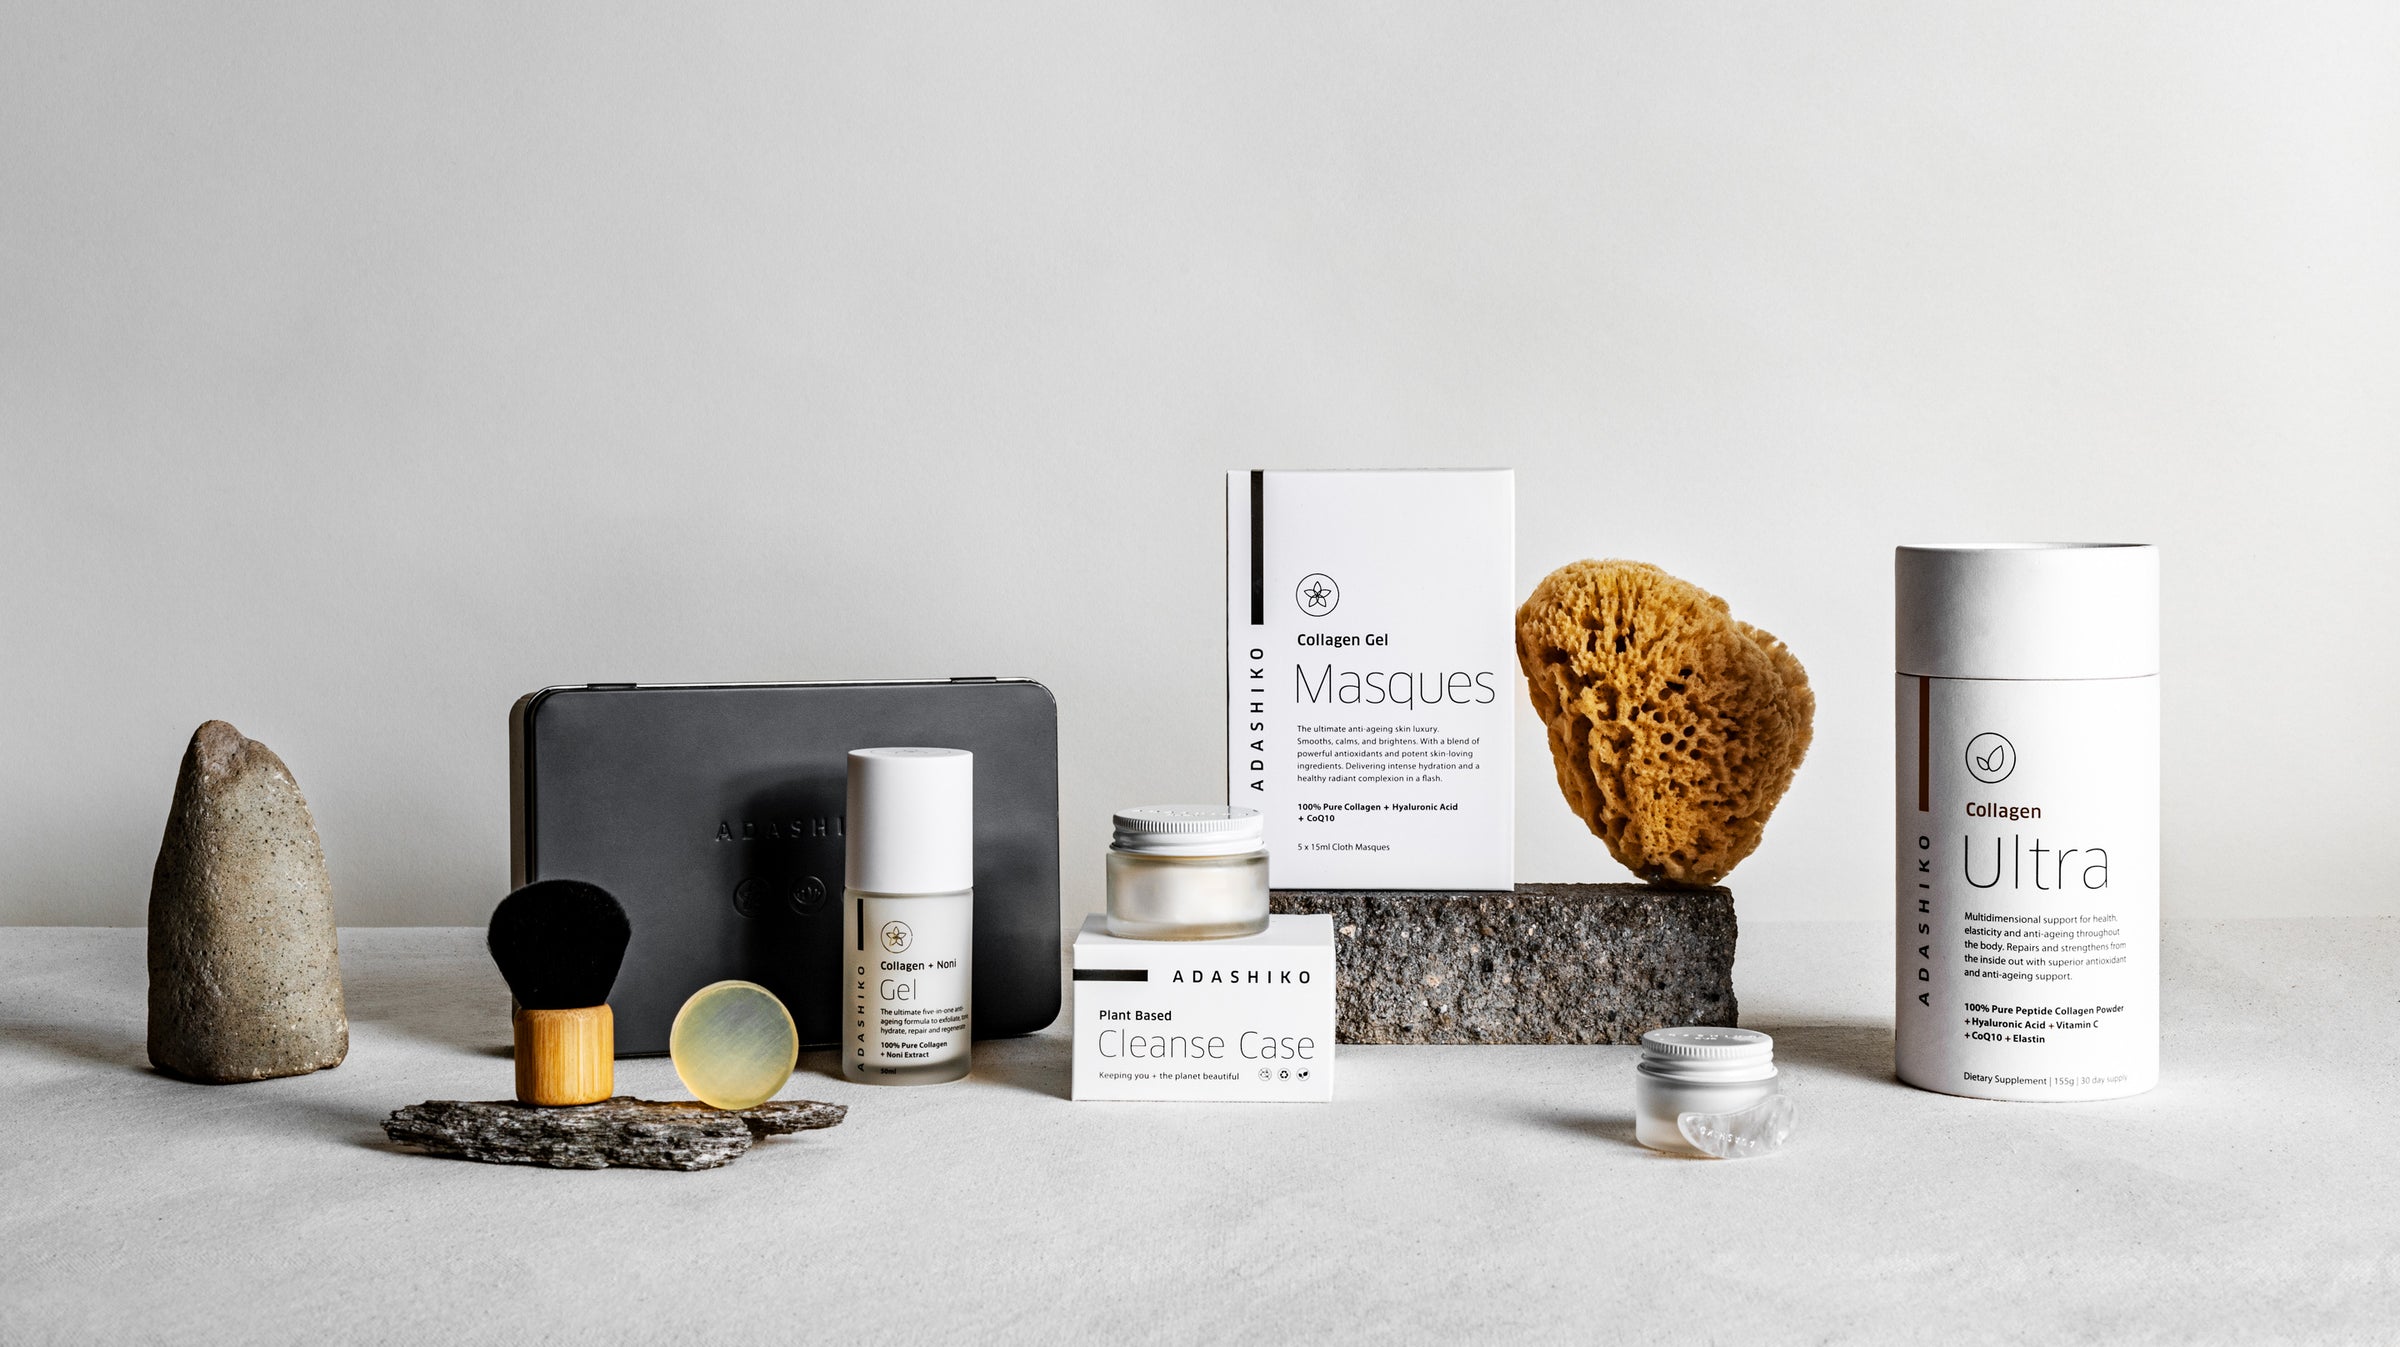 Adashiko Collagen + Skincare Kits - selection of products displayed against a grey background | Adashiko Collagen | 100% Natural Skincare